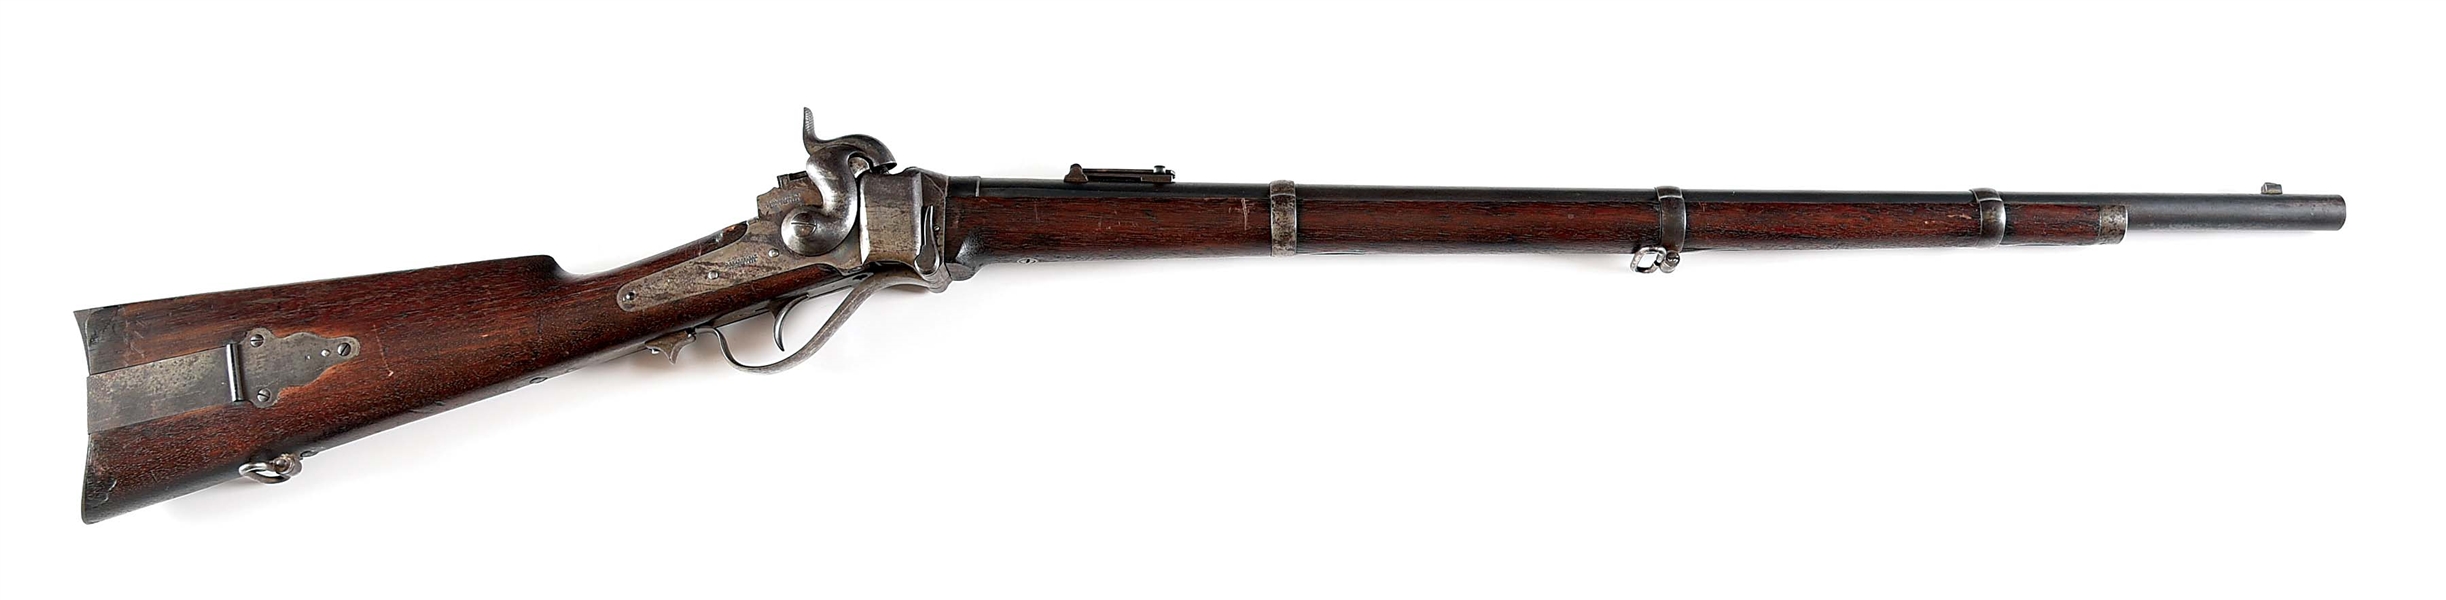 (A) MARTIALLY MARKED SHARPS MODEL 1863 BREECH LOADING PERCUSSION RIFLE.